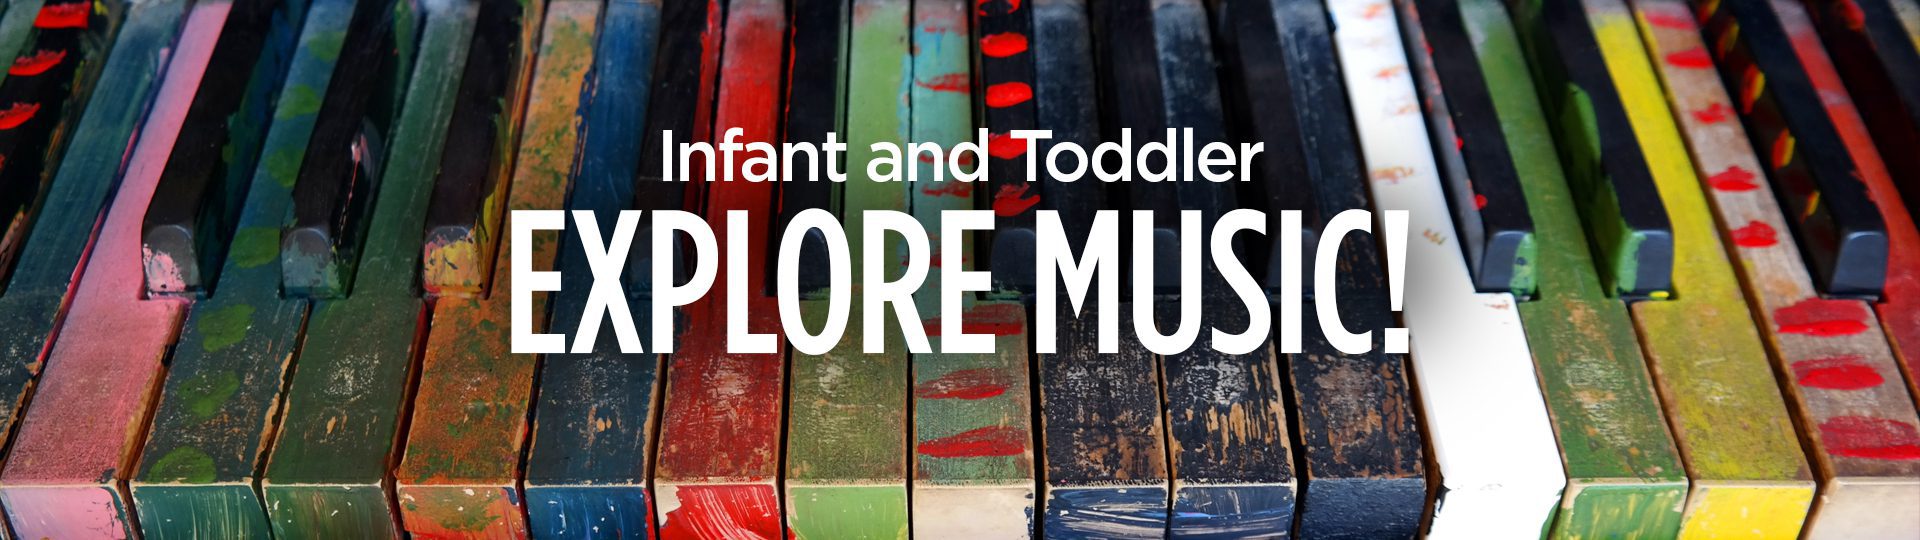 Infant and Toddler - Explore Music!